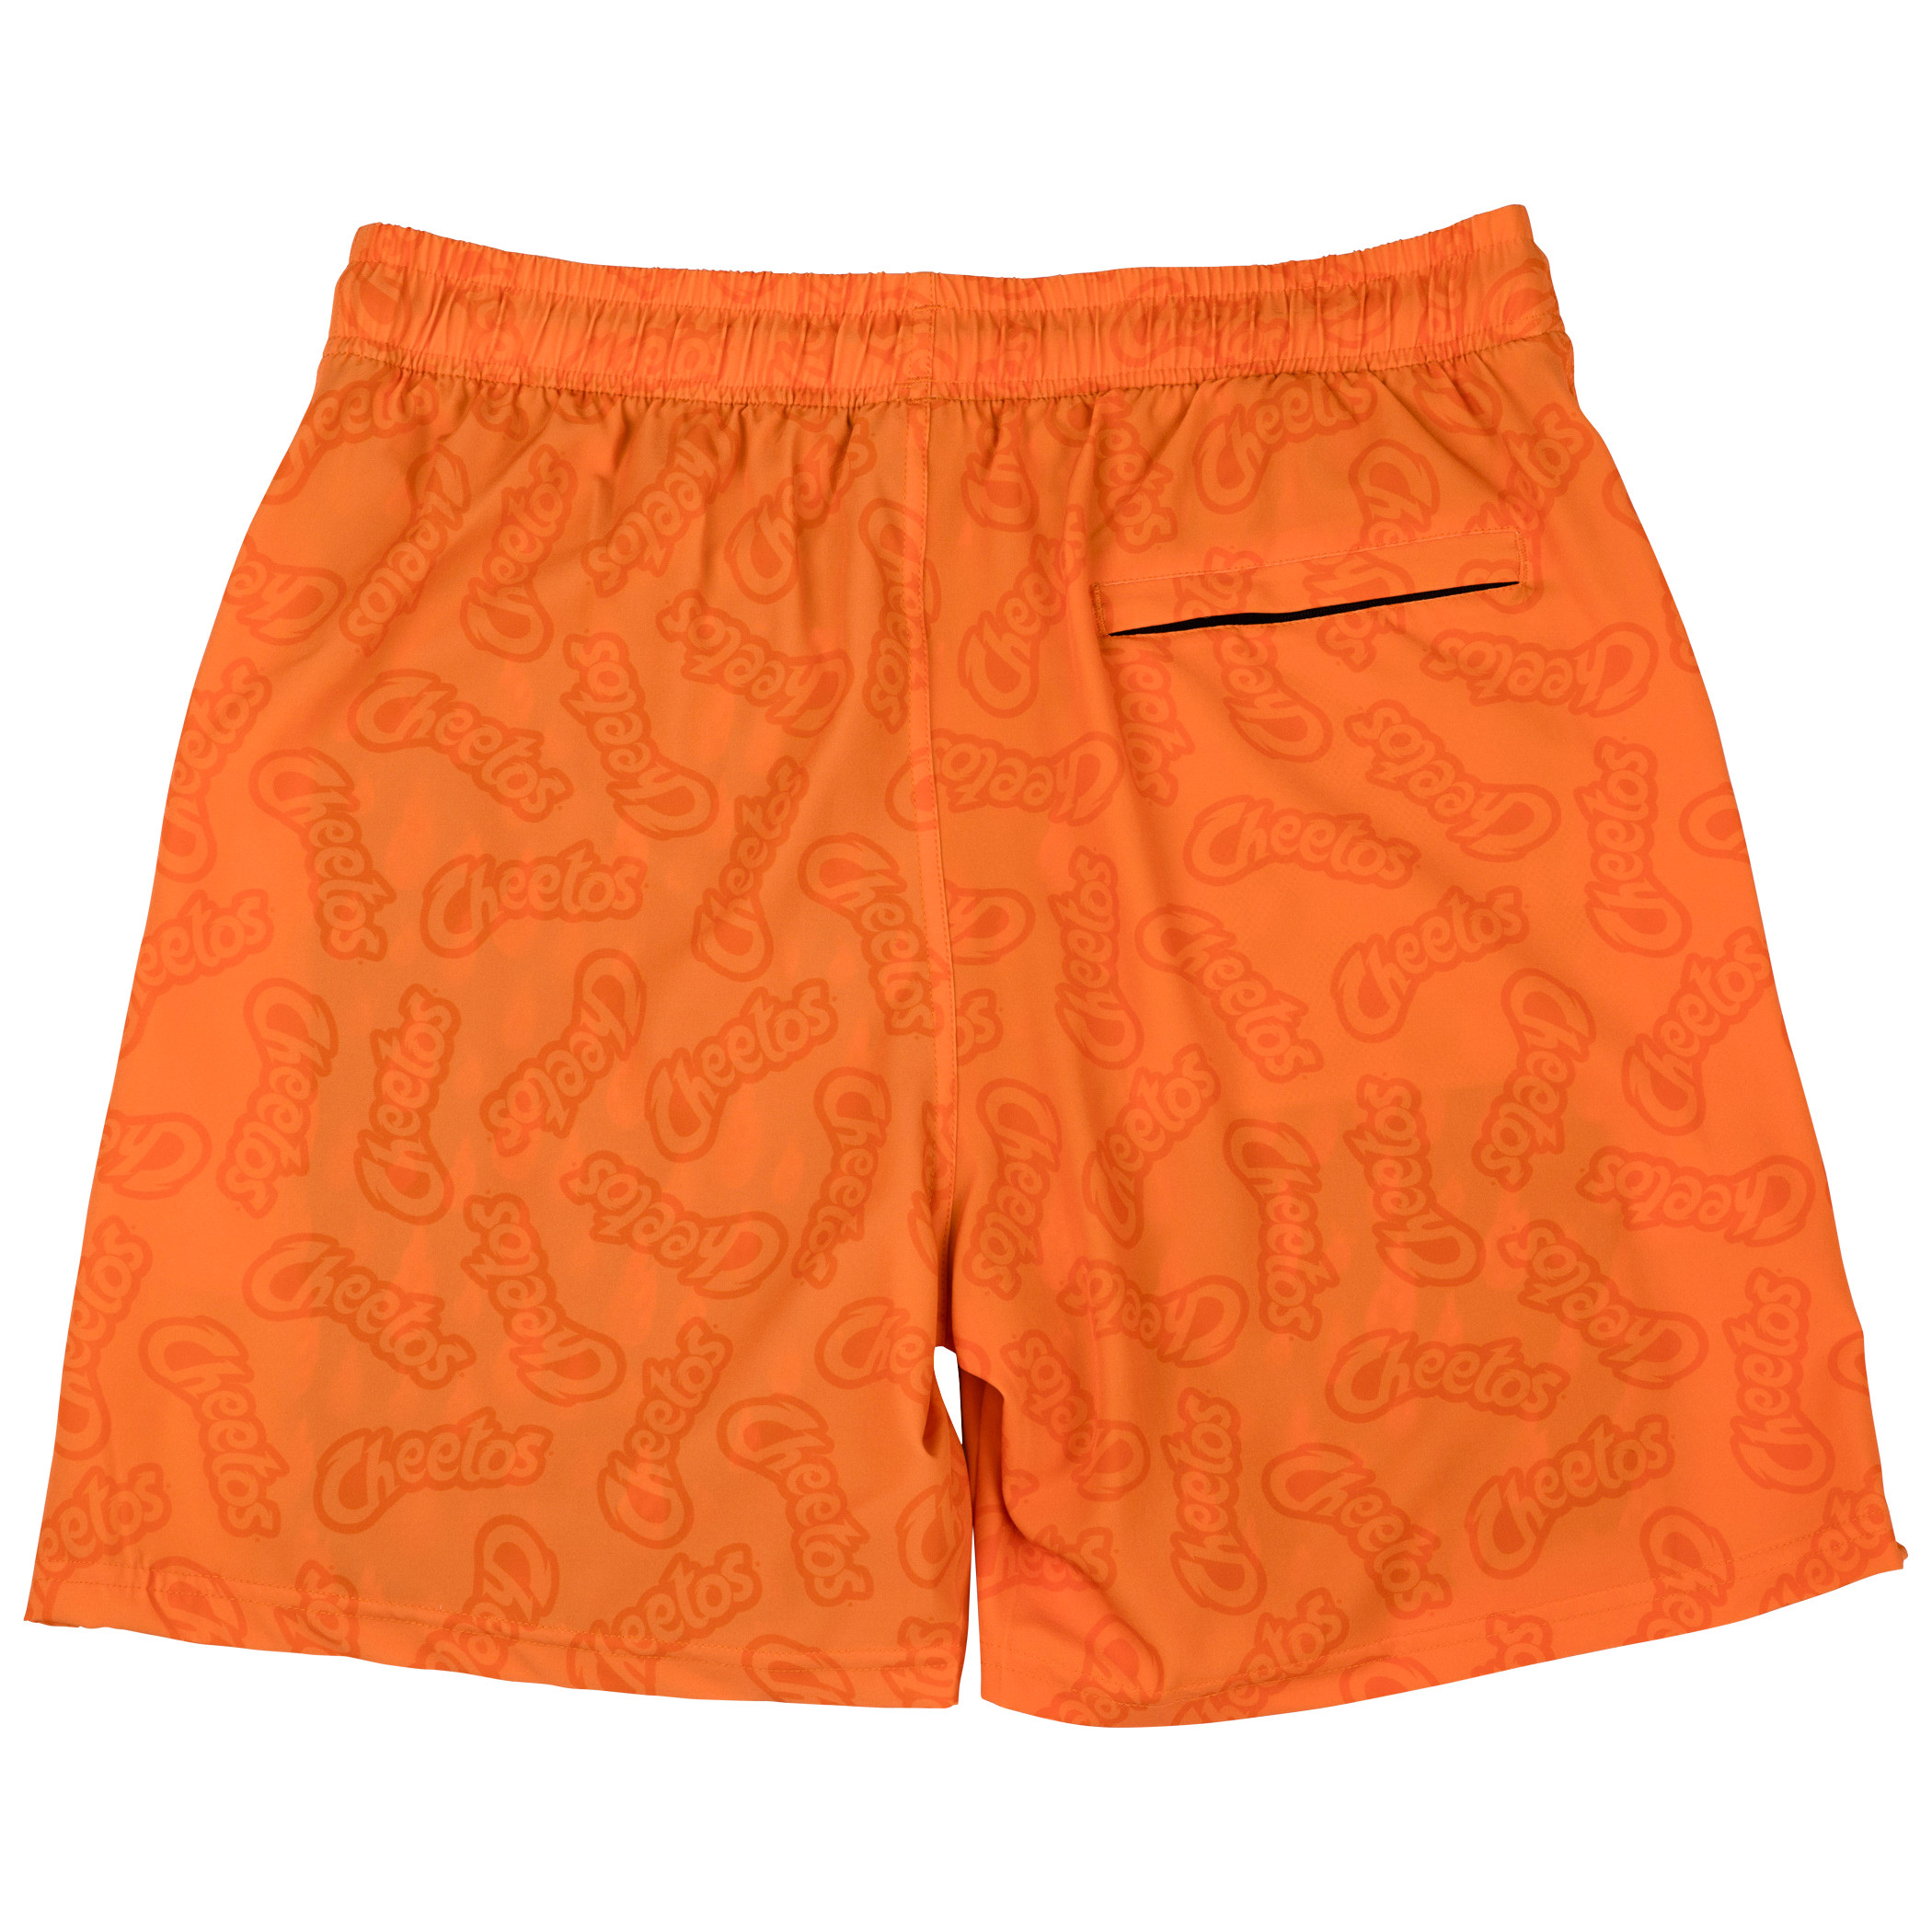 Flaming Hot Cheetos Bag 6" Inseam Lined Swim Trunks